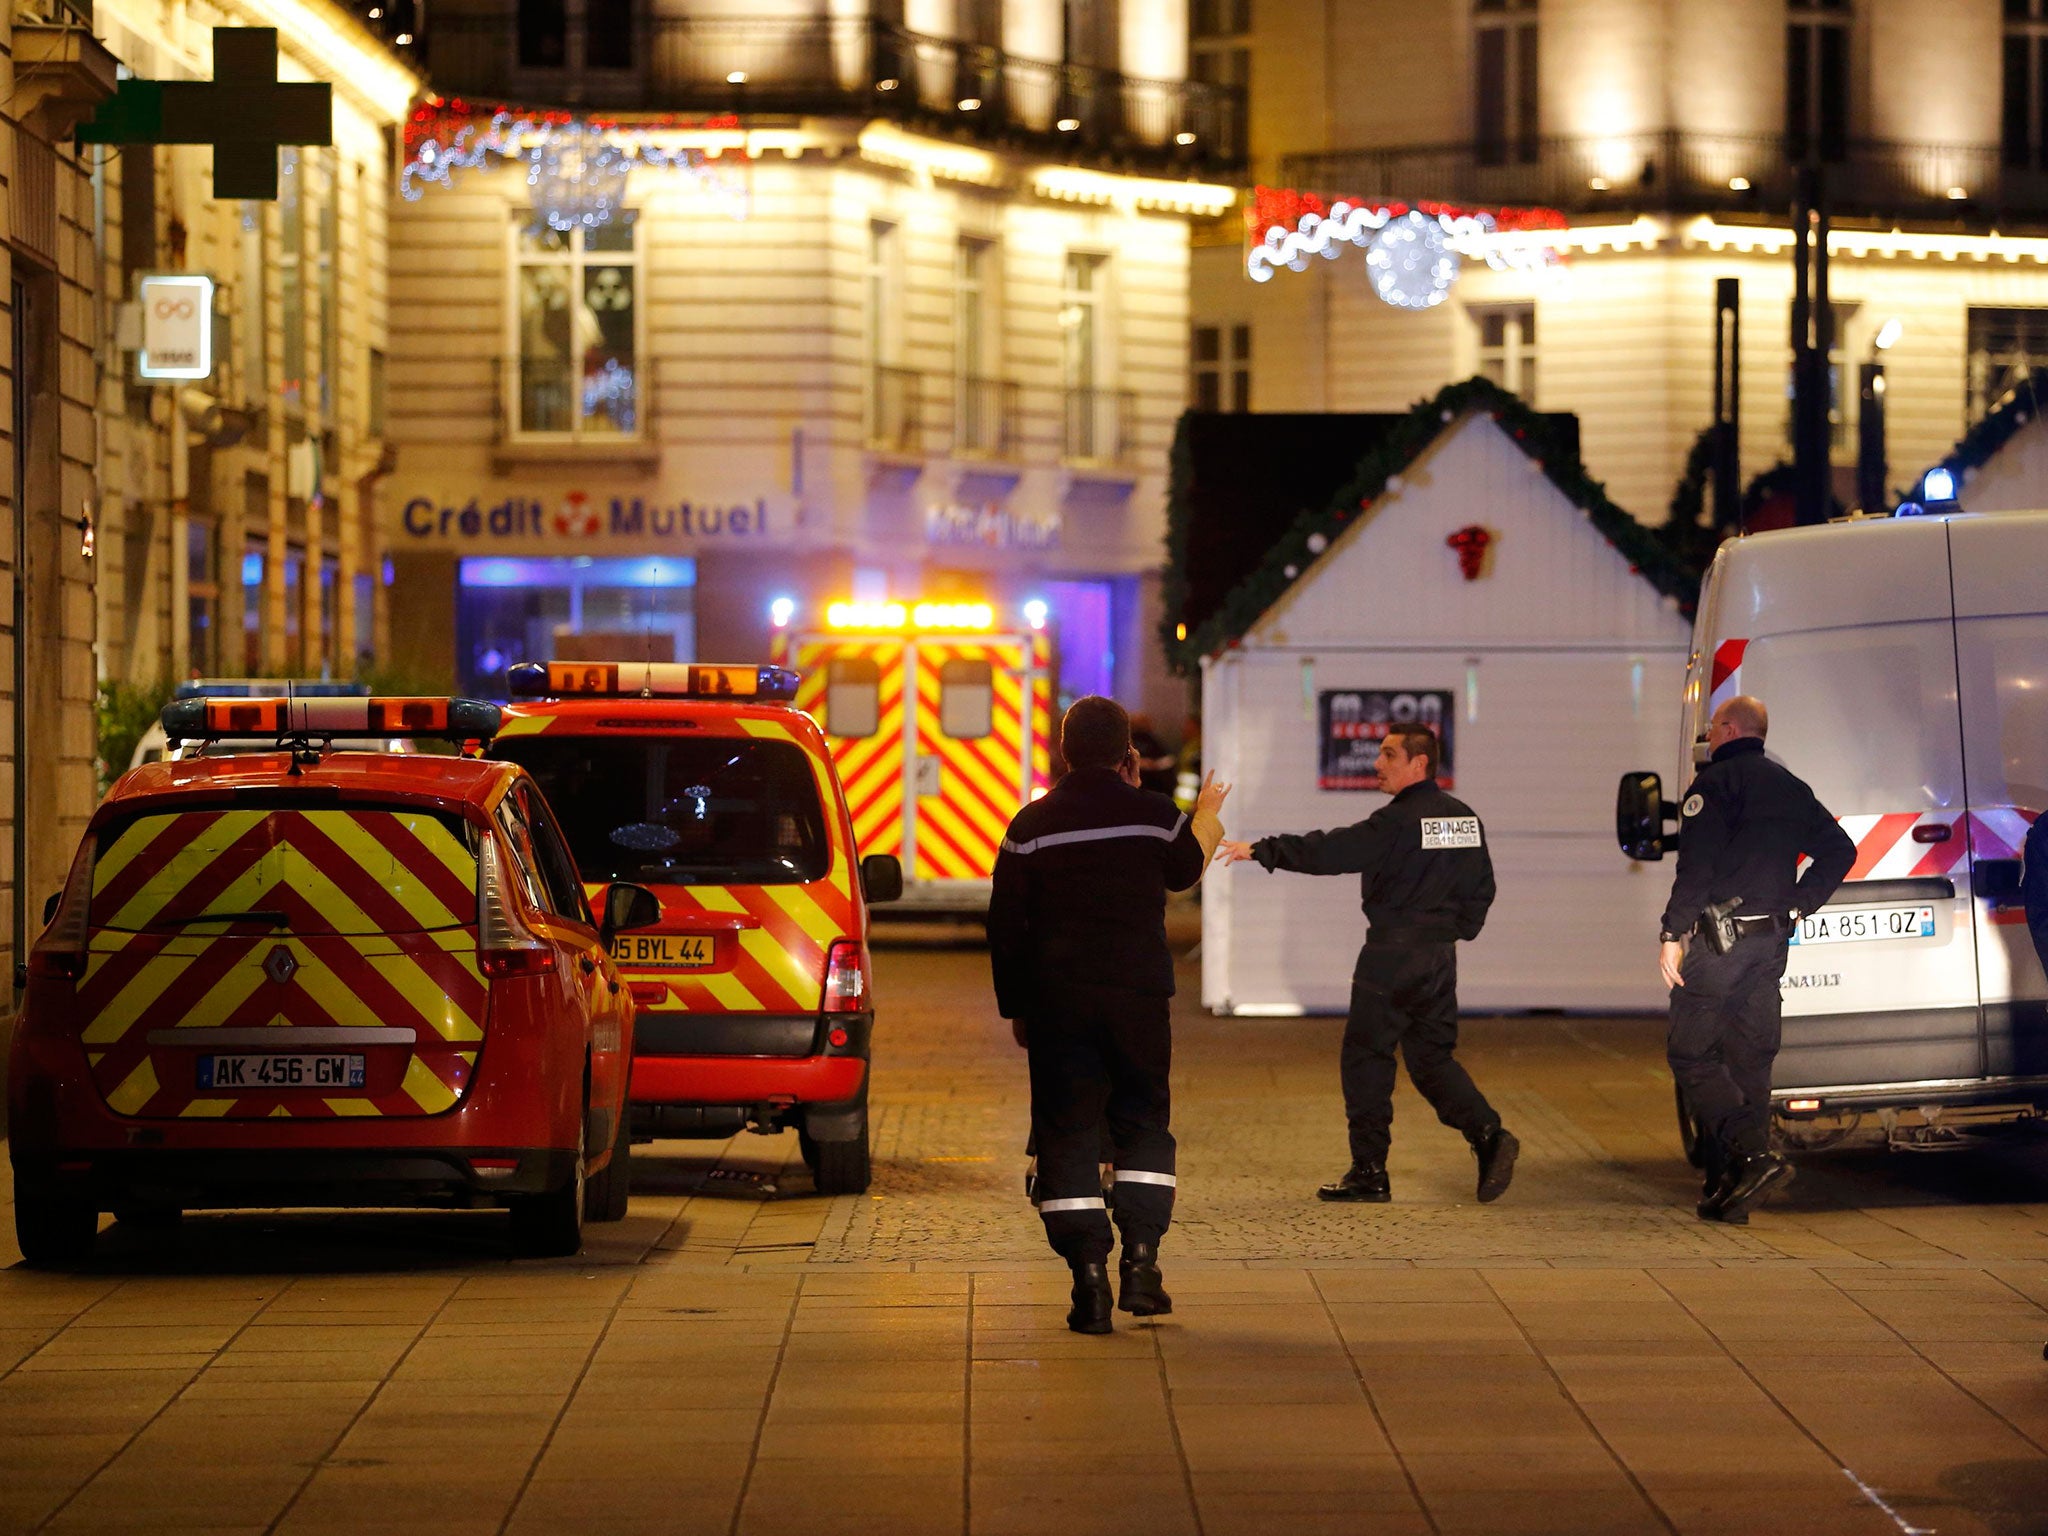 Eleven people were hurt, five seriously, when a van drove into a Christmas market in France